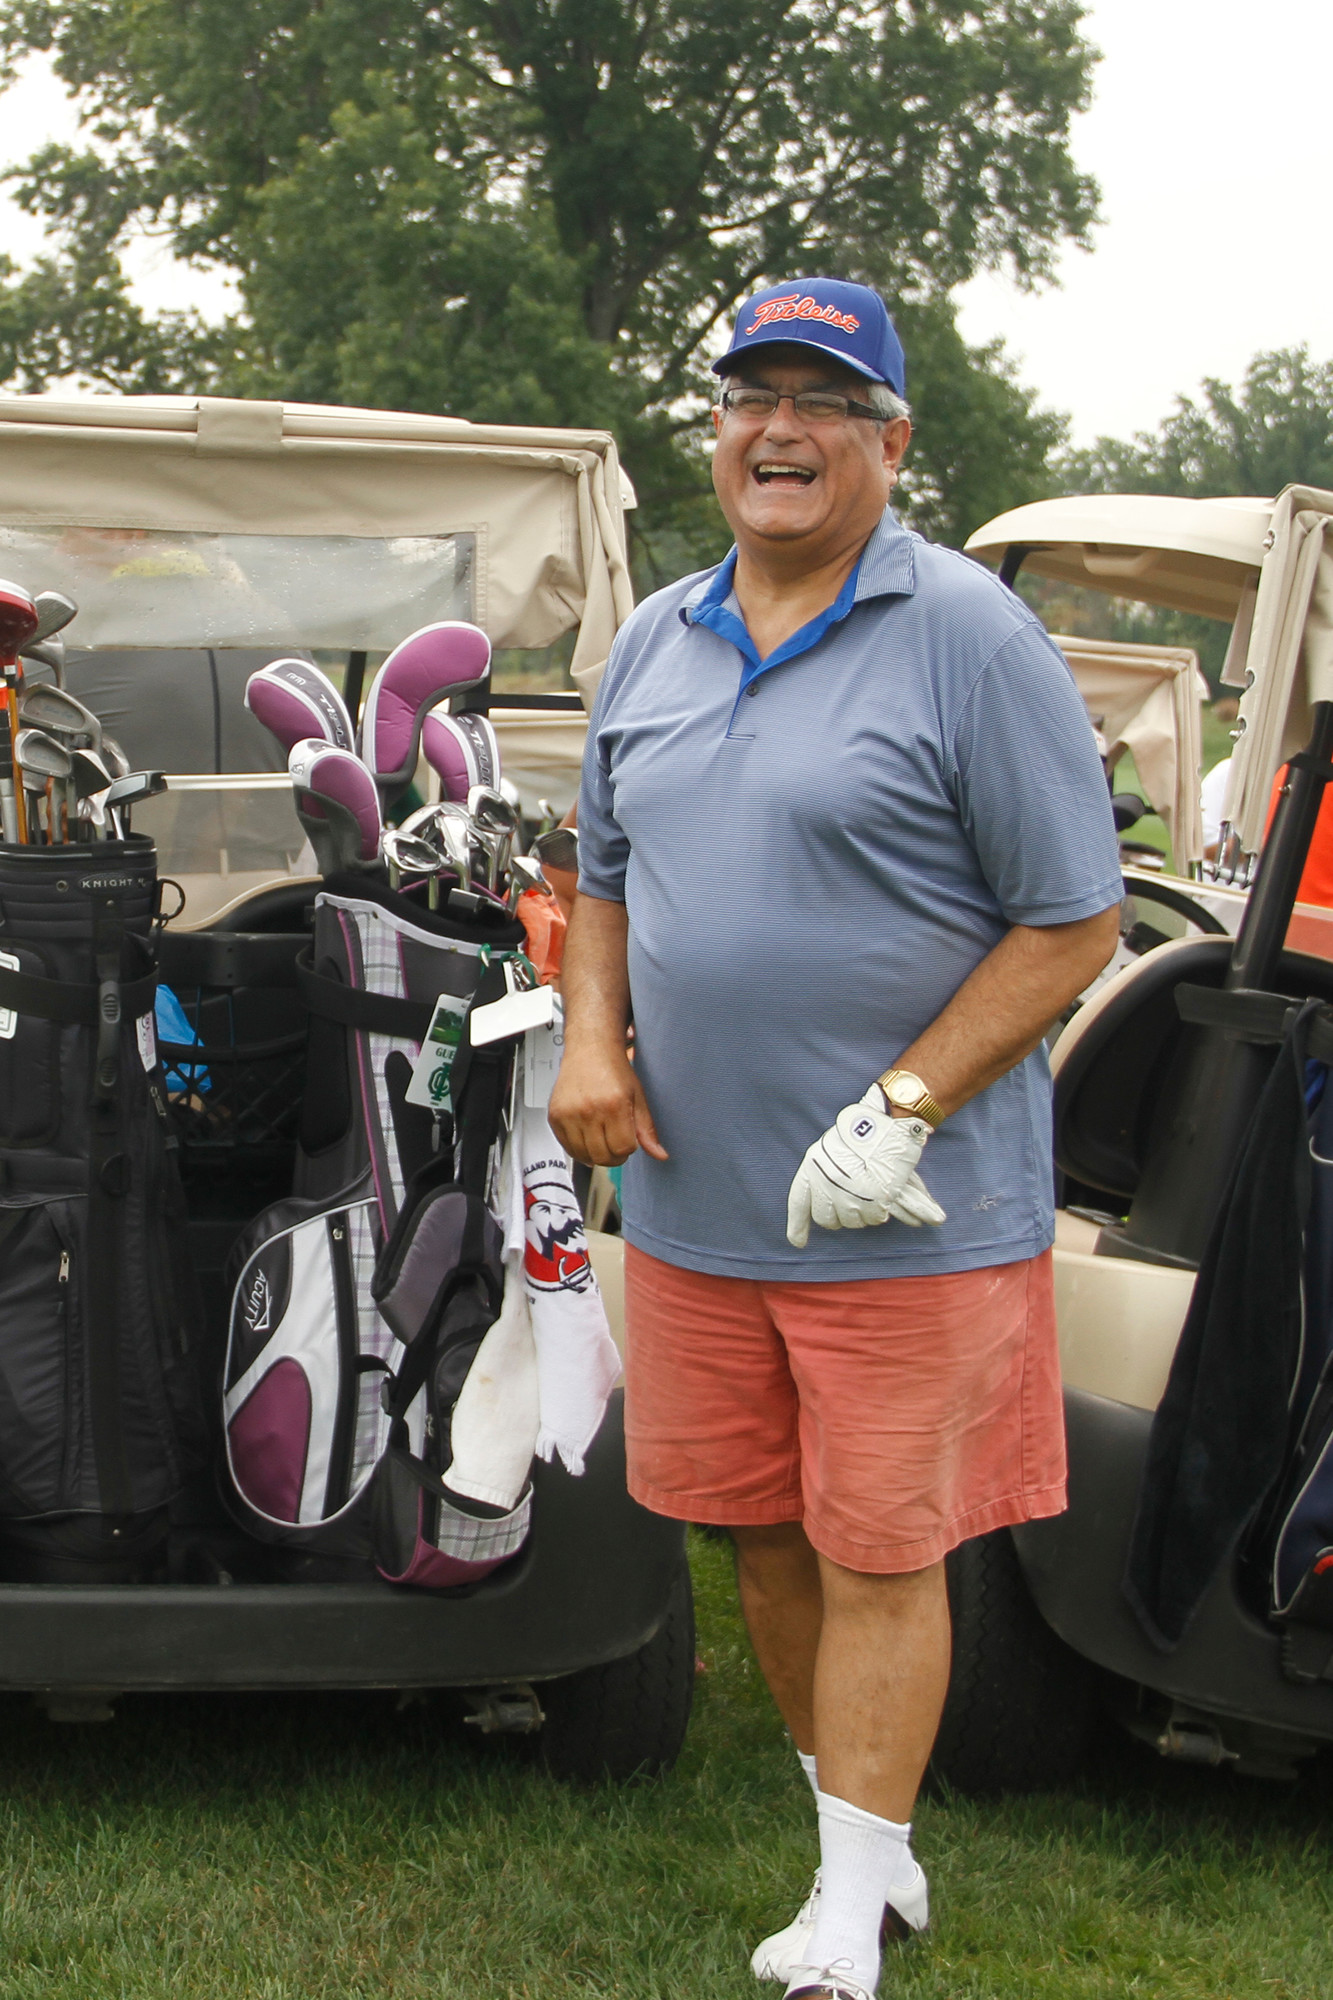 TOH Councilman Anthony Santino played golf.